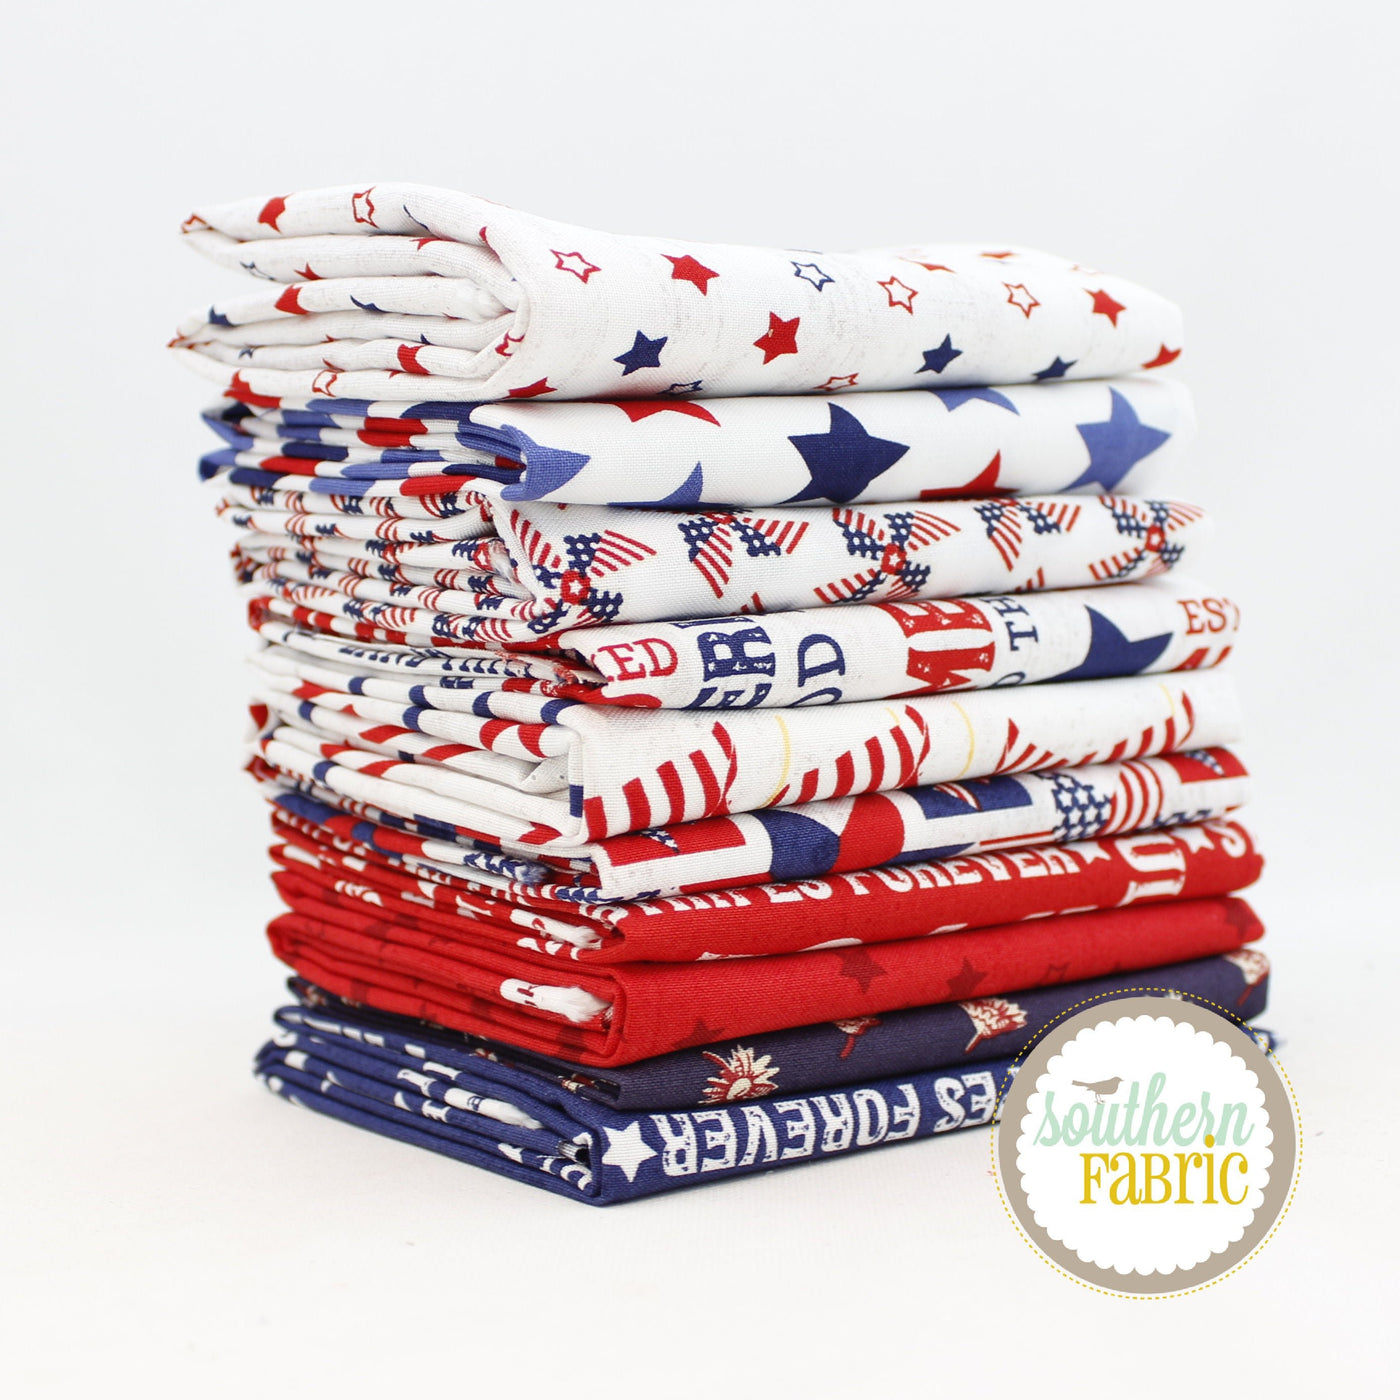 Patriotic Half Yard Bundle (10 pcs) by Mixed Designers for Southern Fabric (PATR.HY)